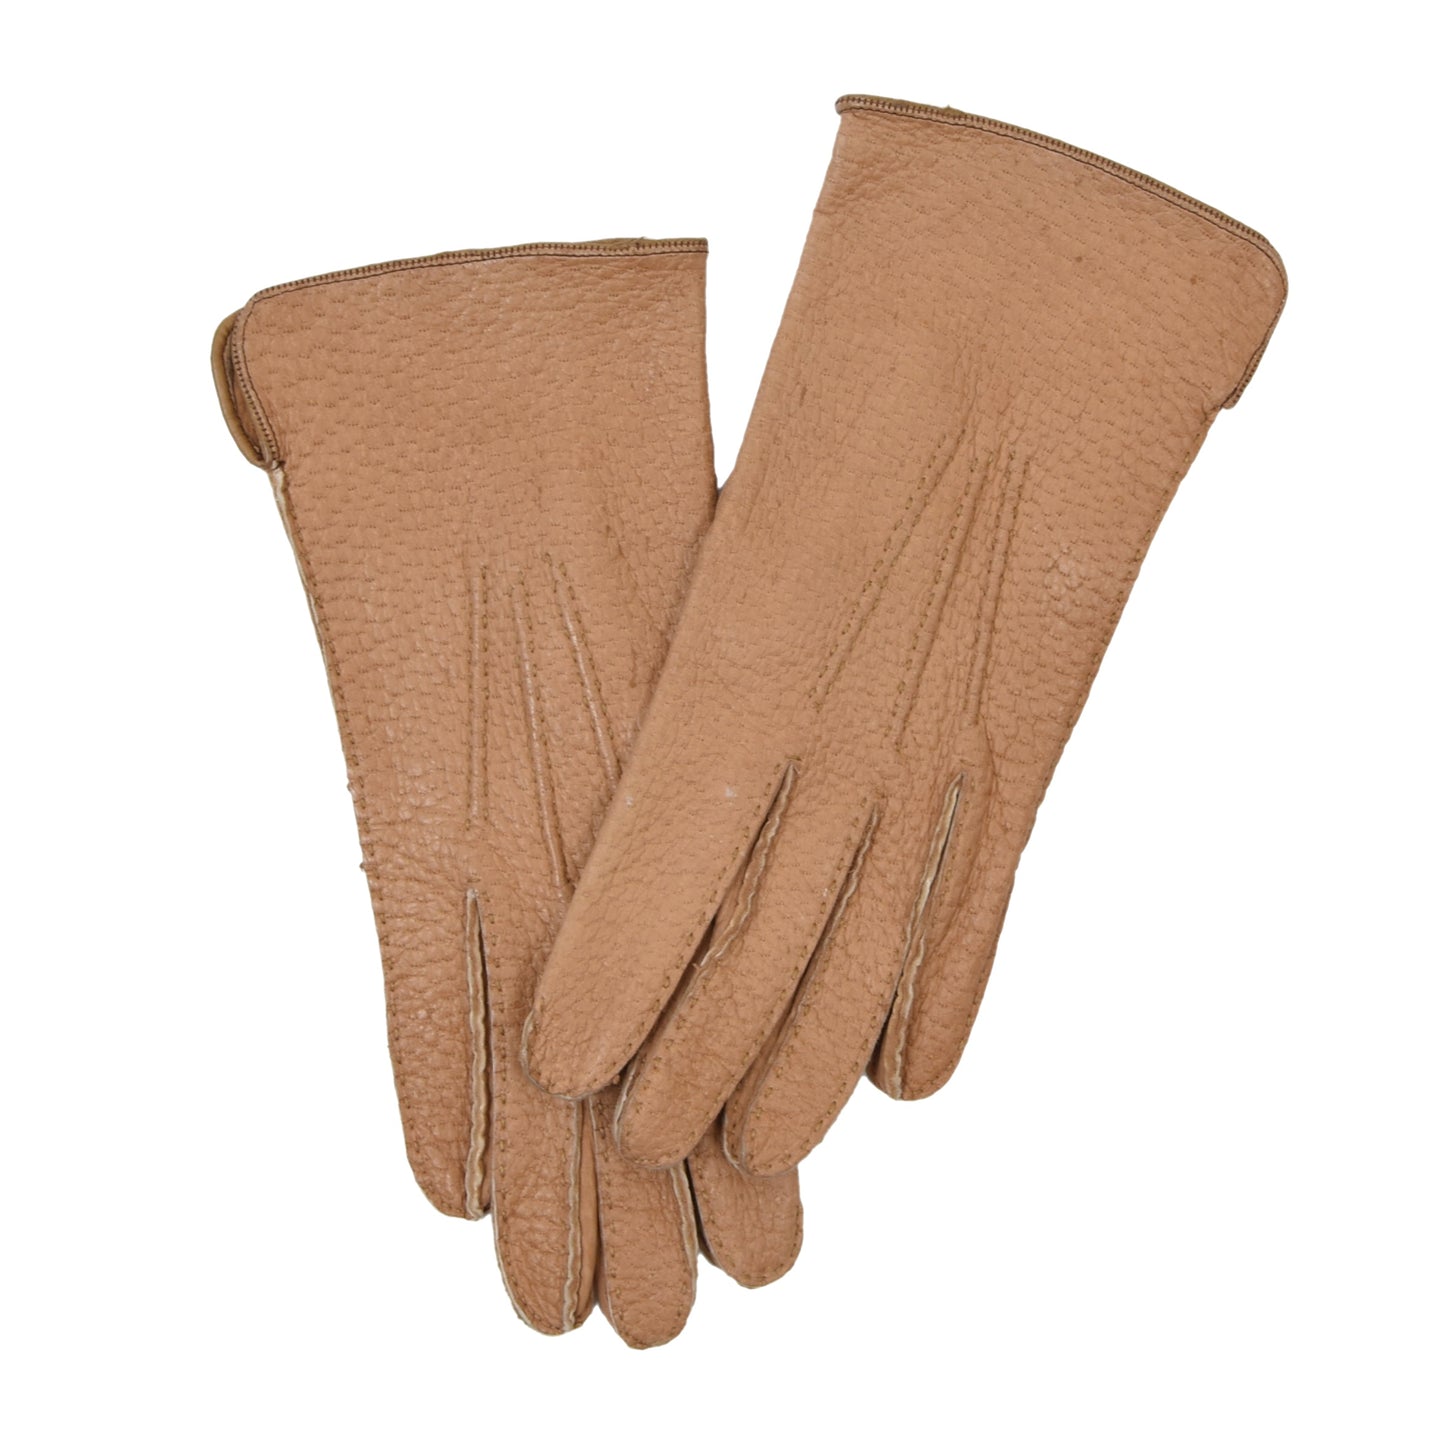 Unlined Peccary Gloves  Size 8 - Tan/Beige